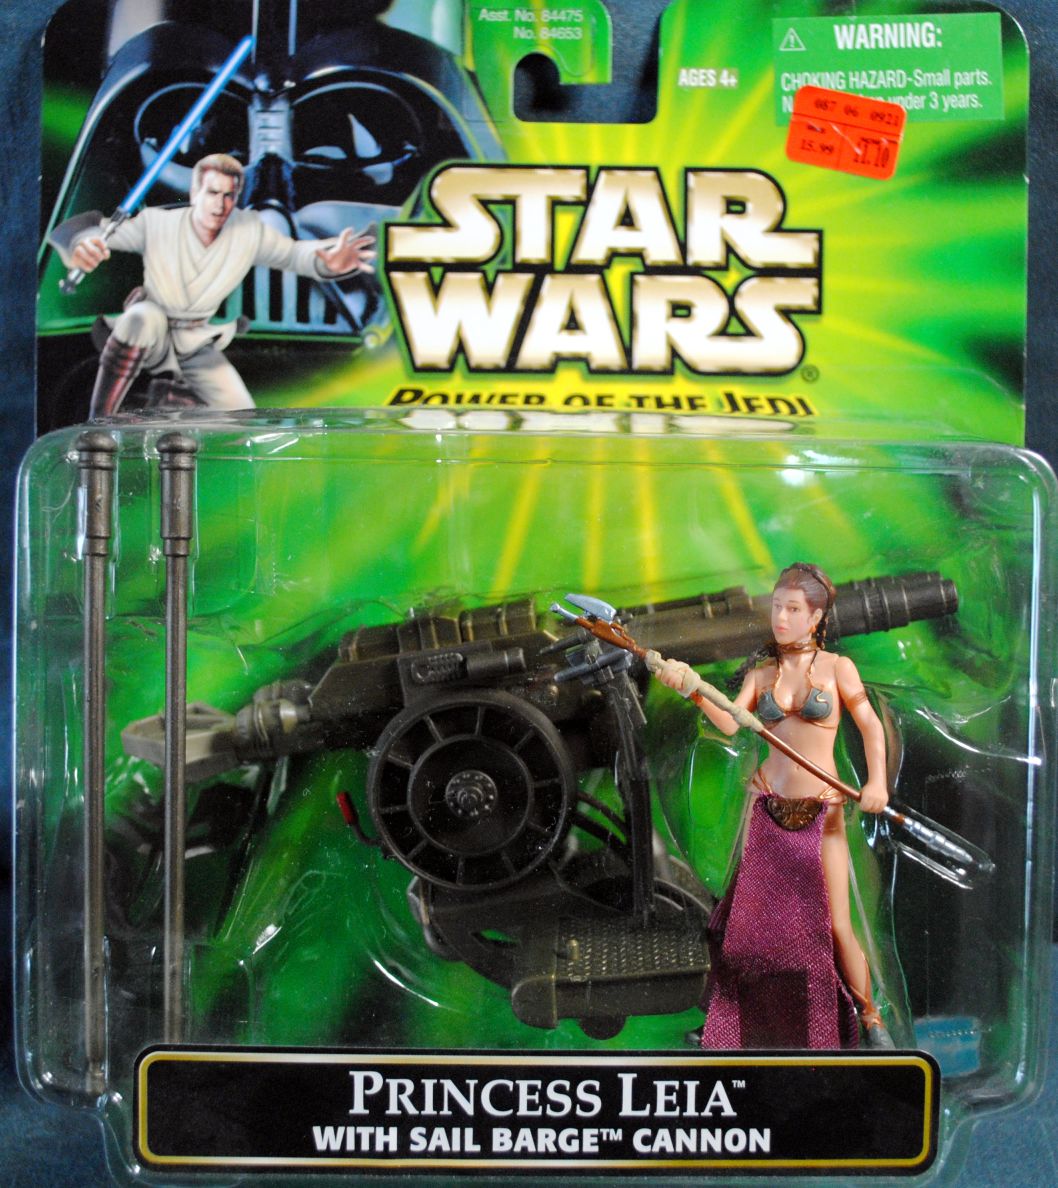 Power Of The Jedi 3.75 - Deluxe Princess Leia slave With Sail Barge Cannon ROTJ - Hasbro (Star Wars Episode VI Return Of The Jedi) action figure collectible [Barcode 0076930846537] - Main Image 1